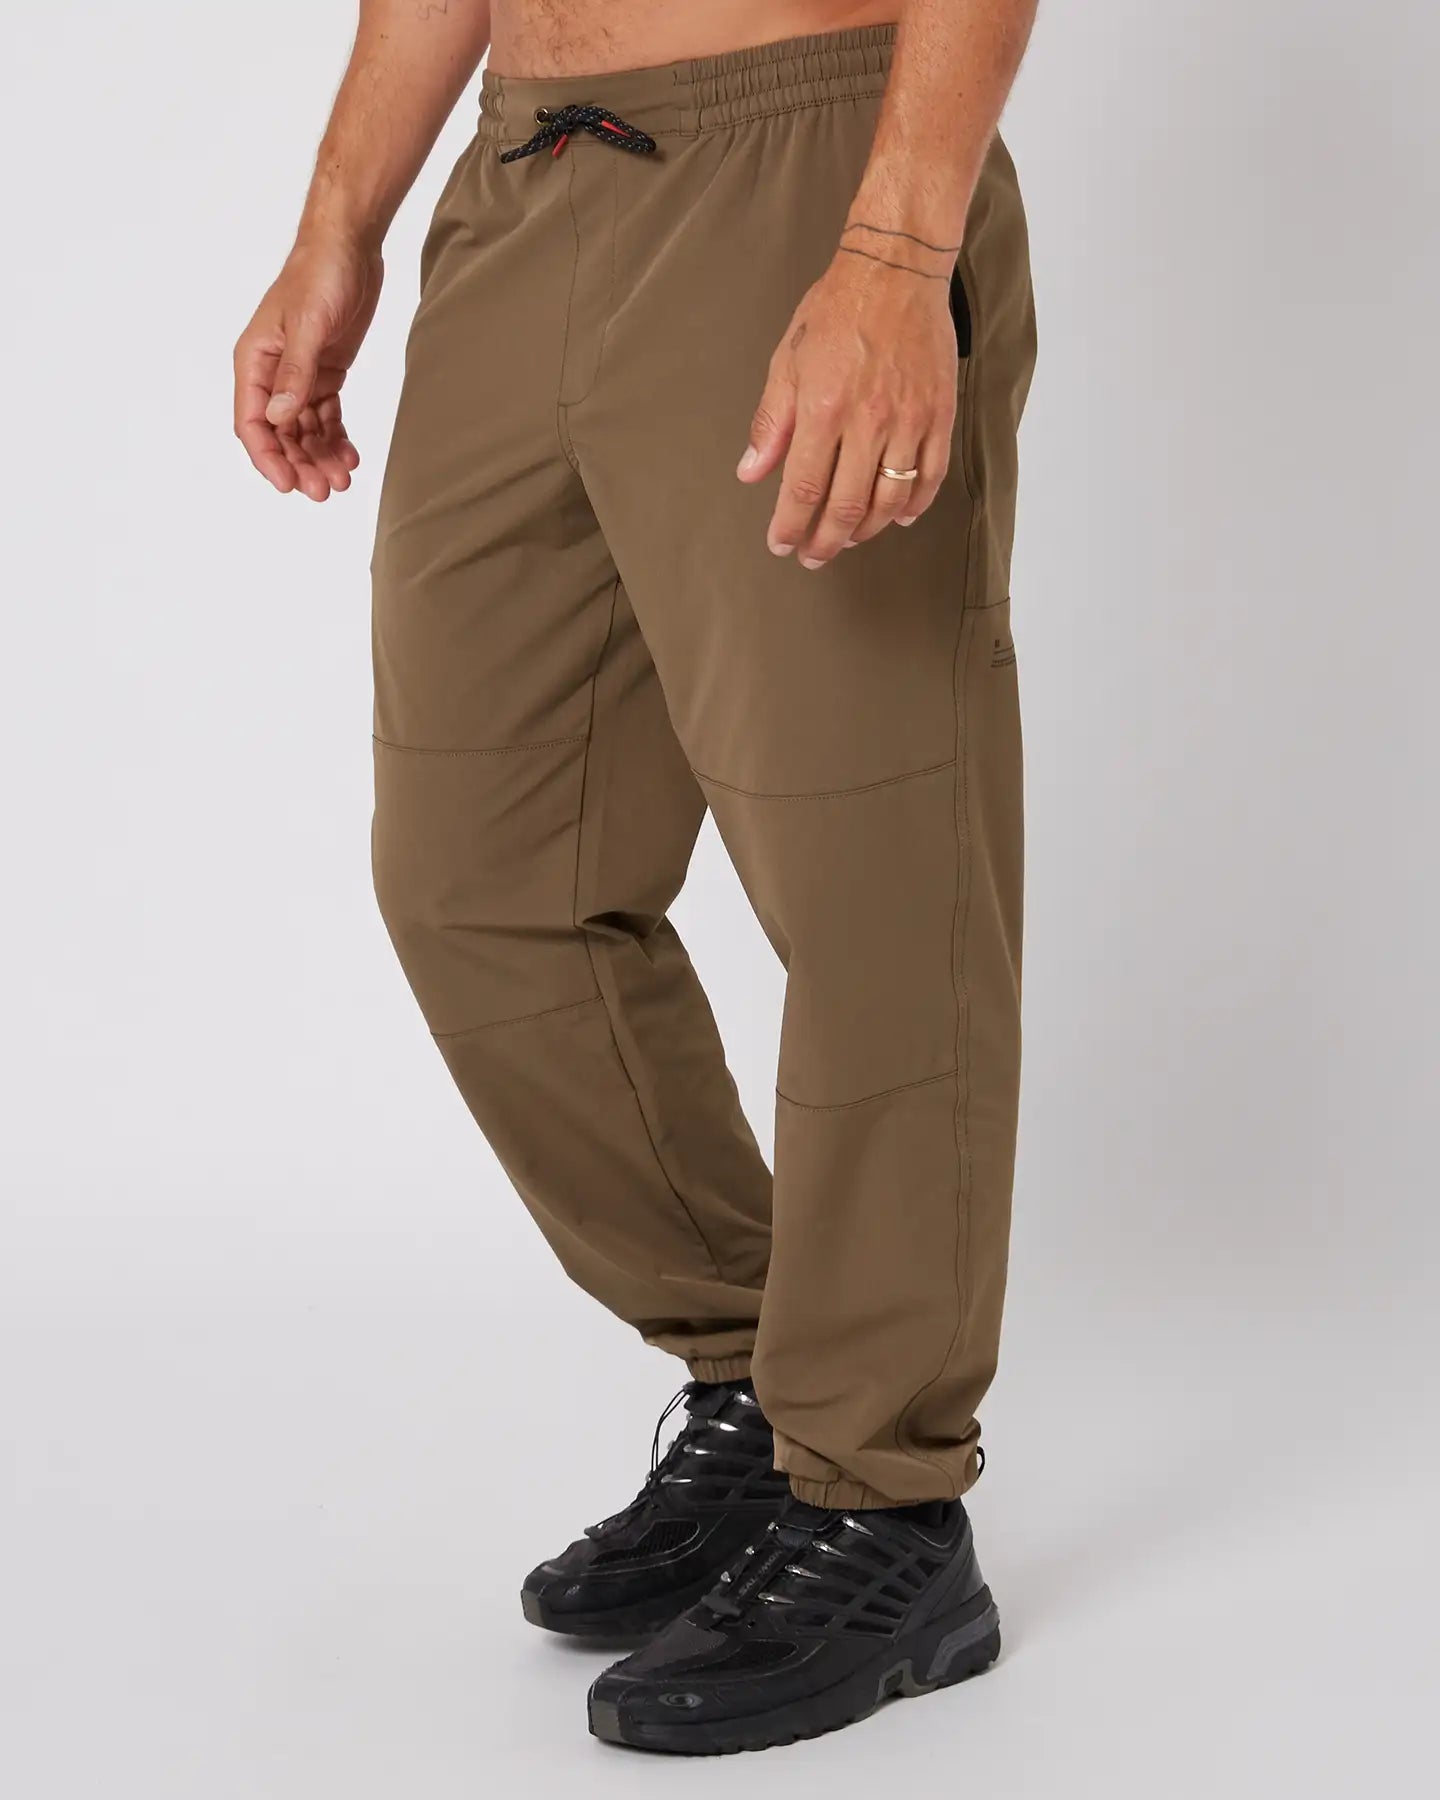 Follow All Day Pants - Deep Taupe 3